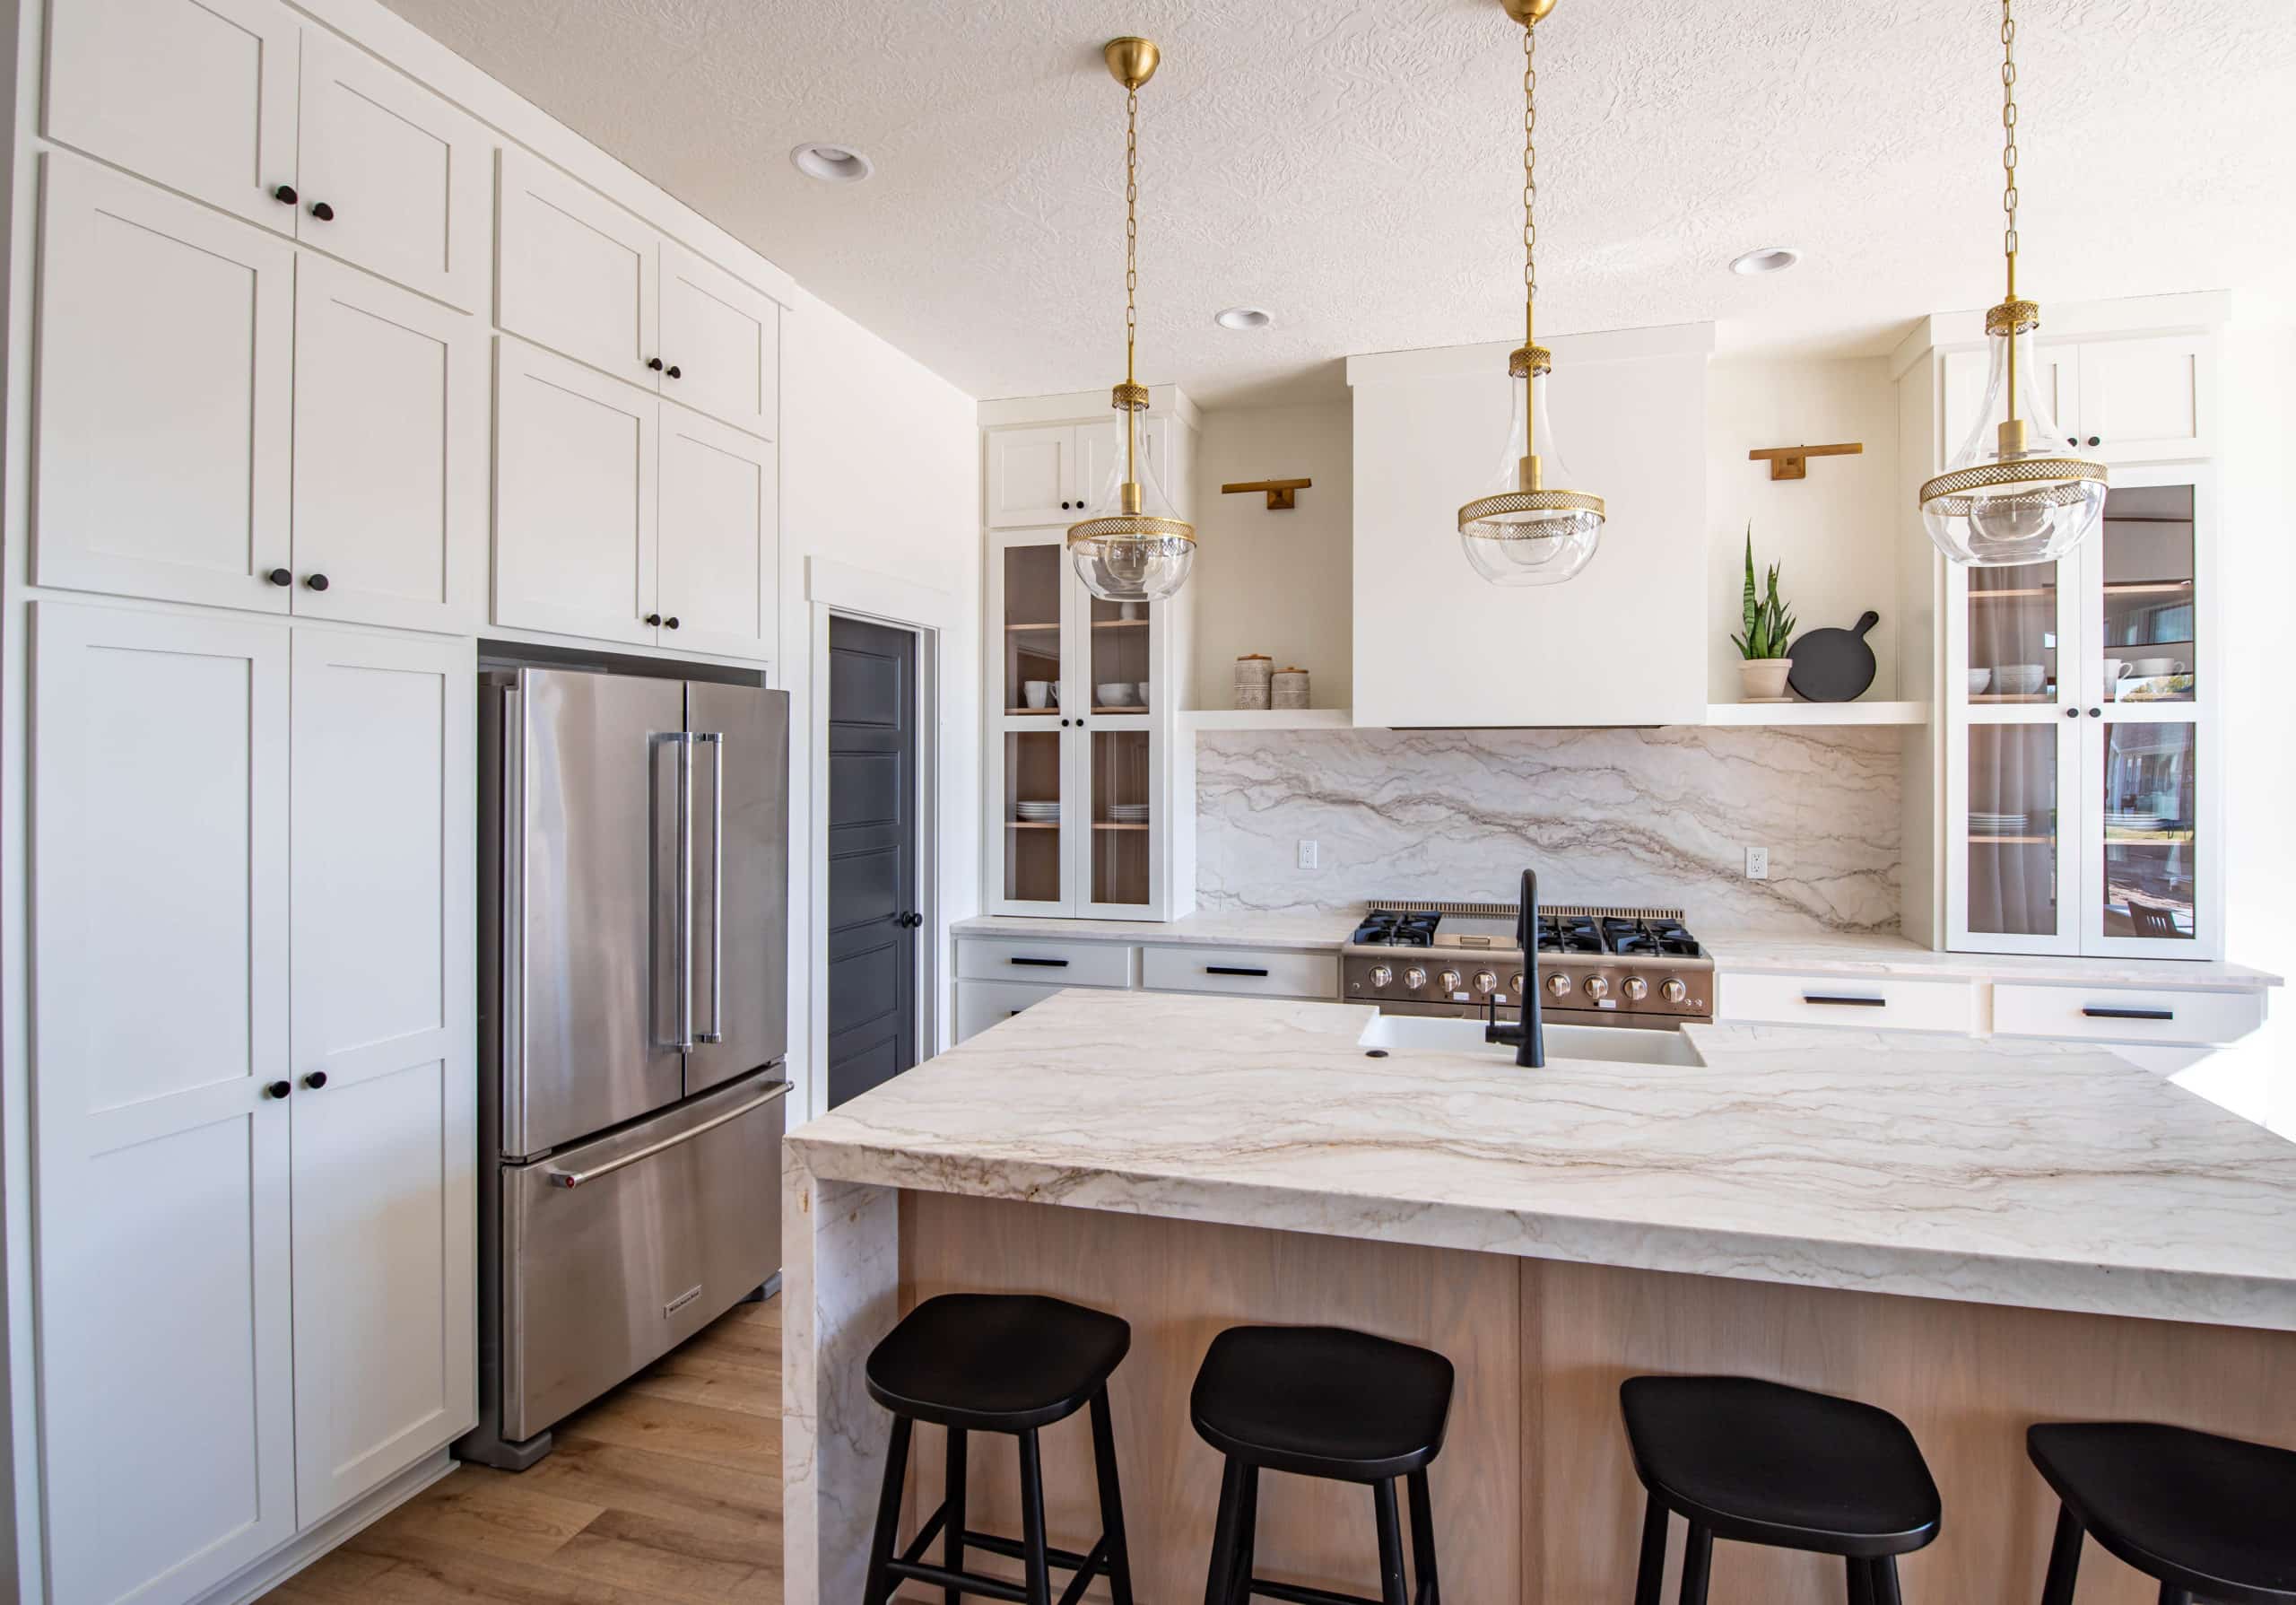 Kitchen Cabinets and Countertops - West Haven UT